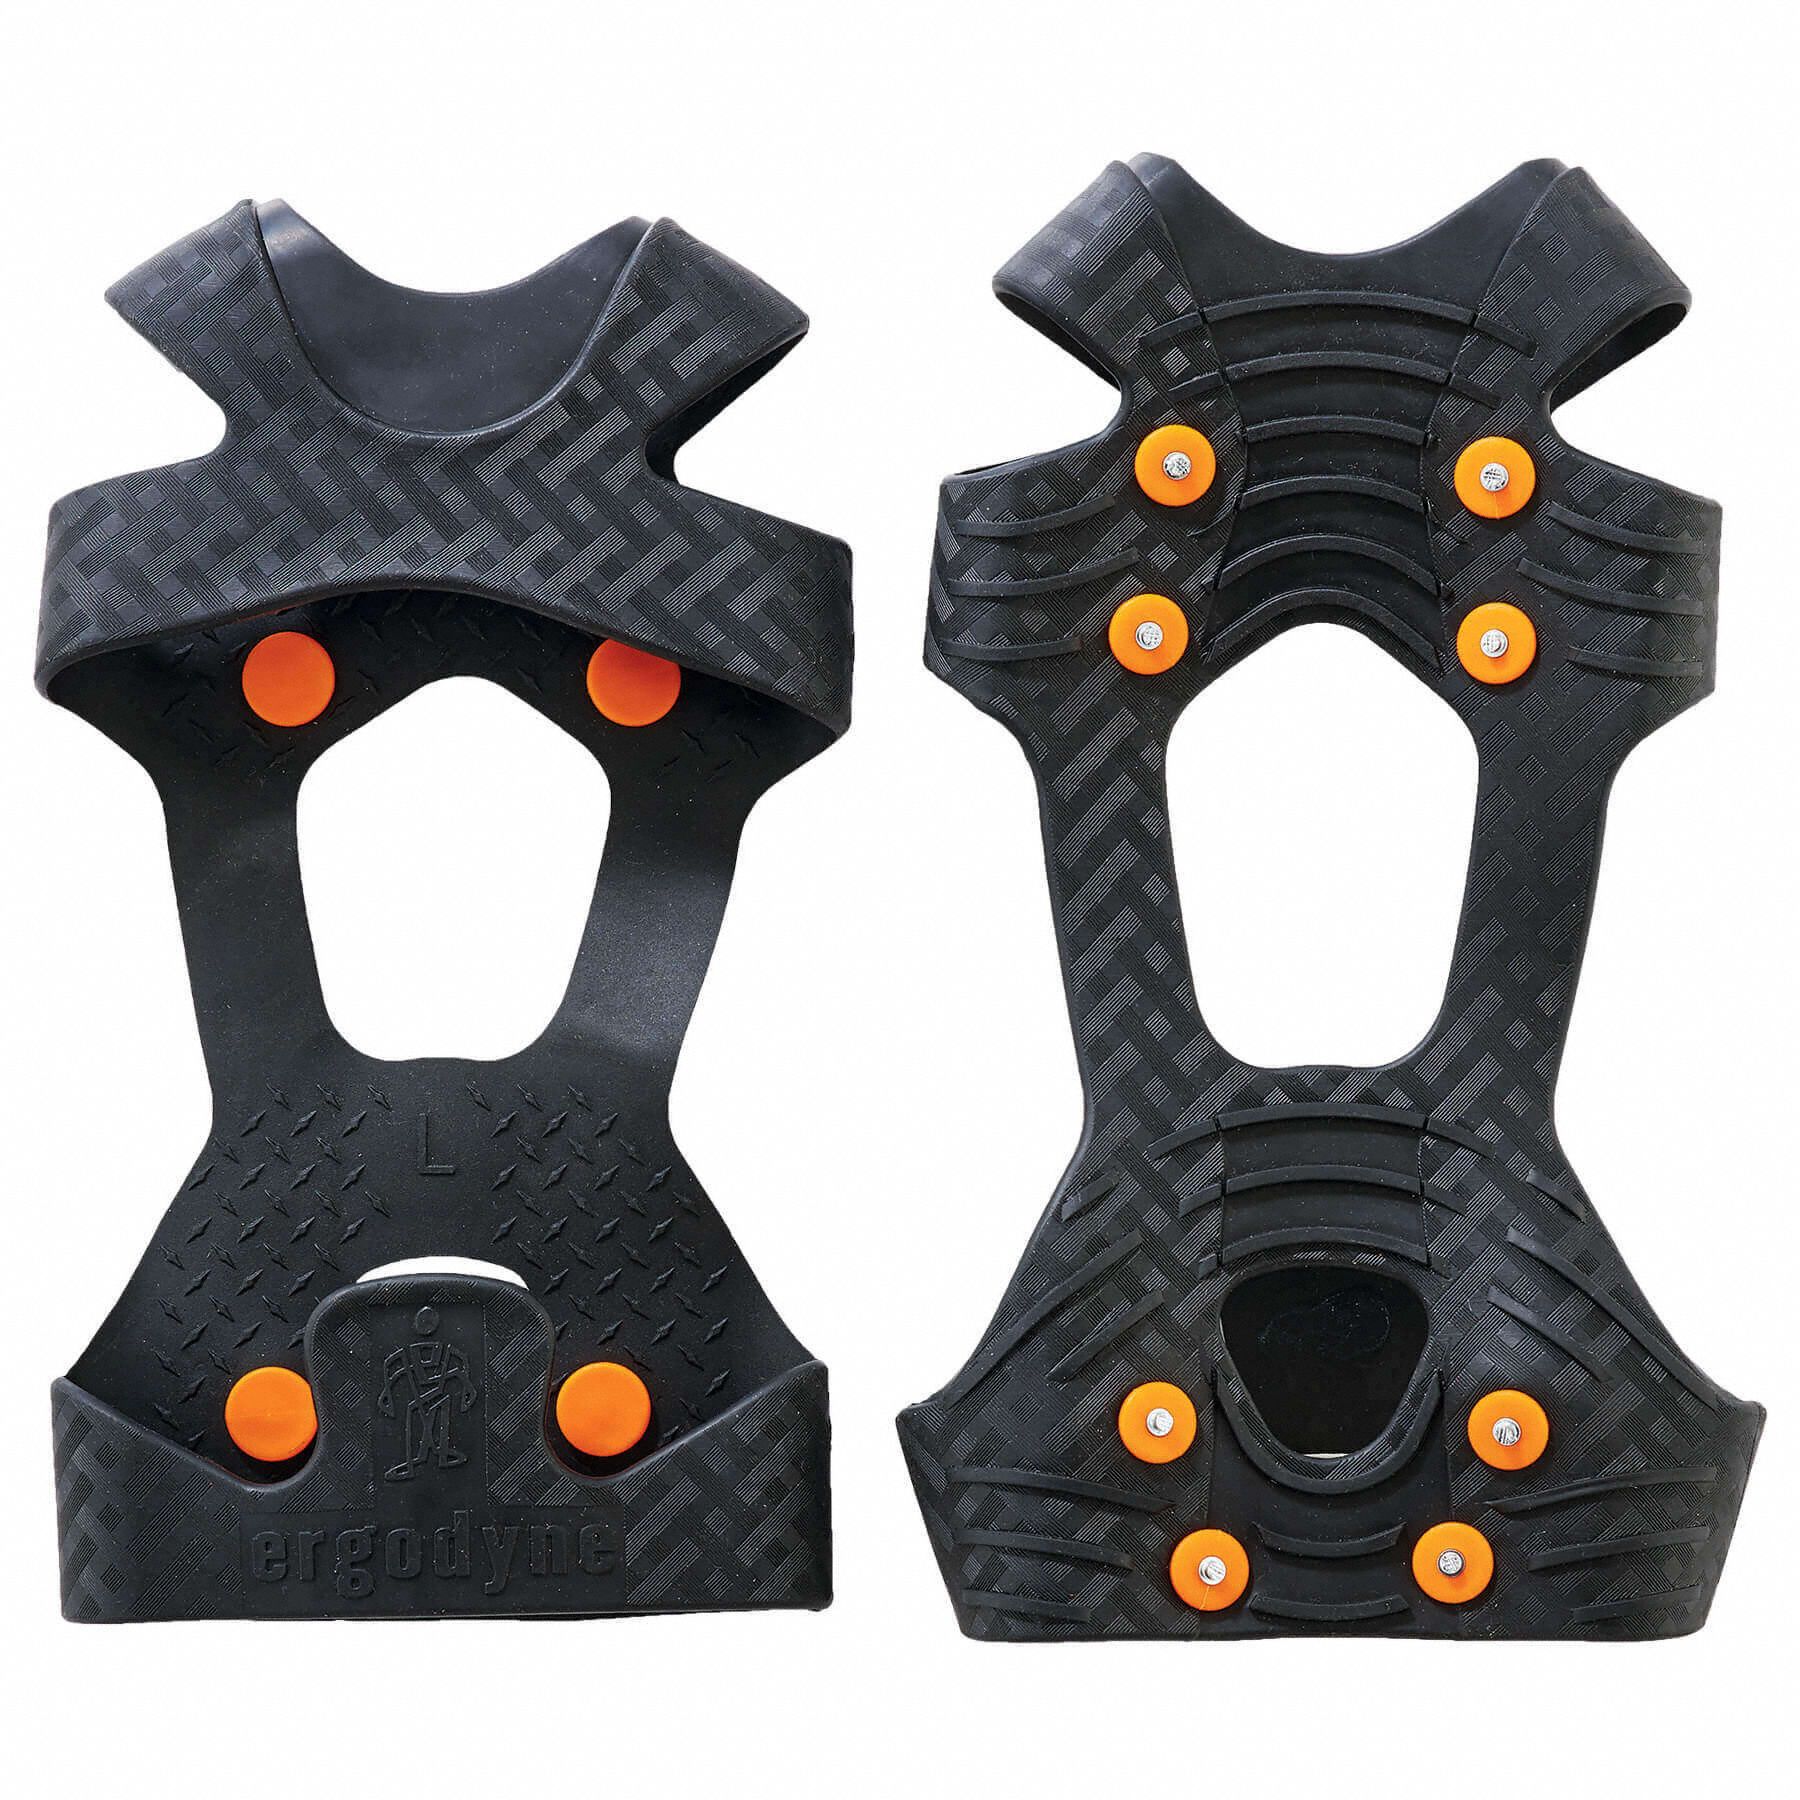 Traction Device: Ball/Heel Footwear Coverage, Rubber, Stud, Strap-On Traction Attachment, 1 PR